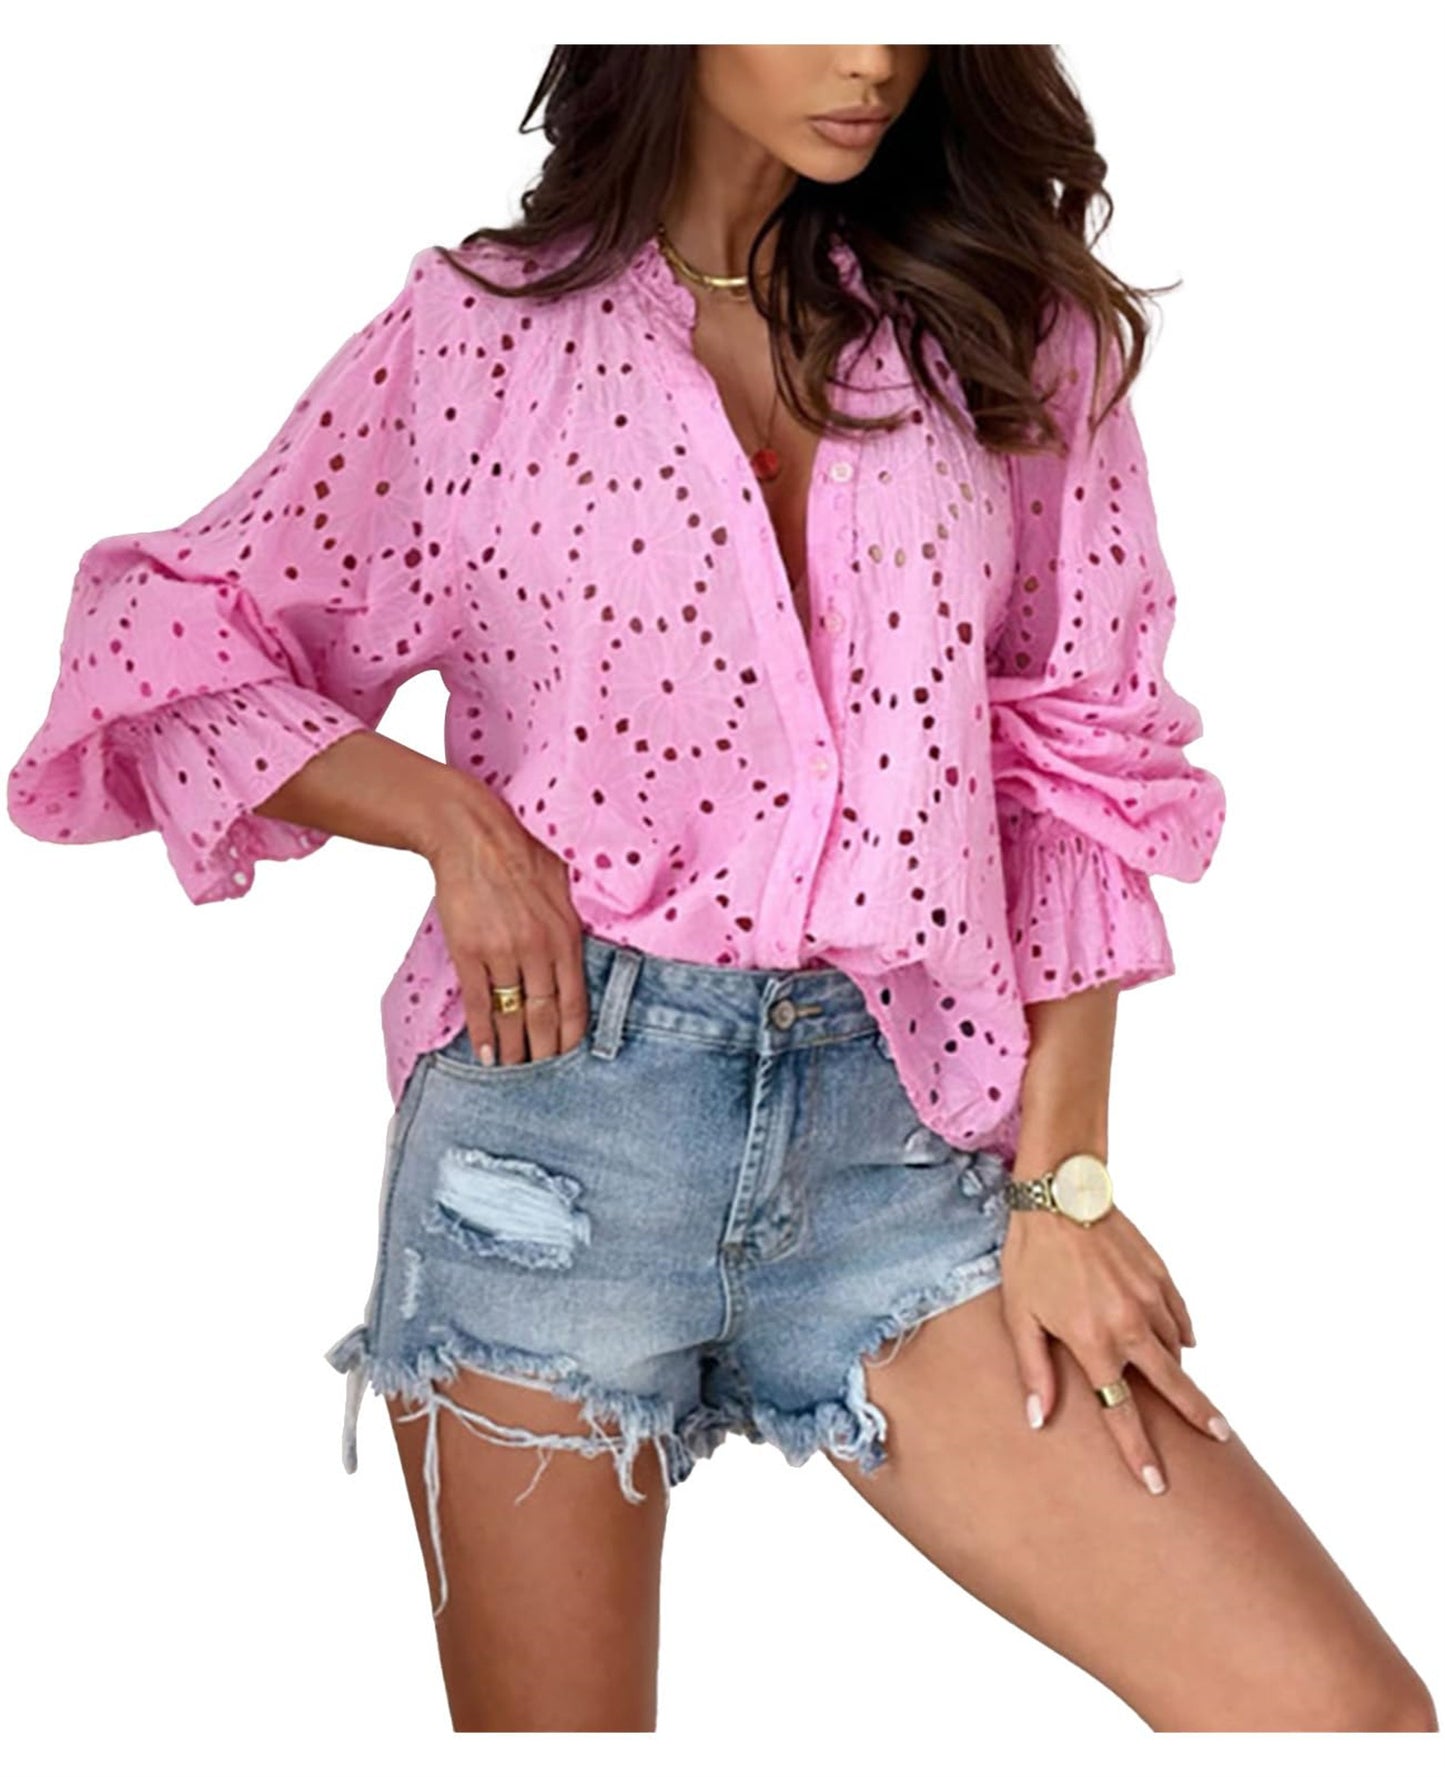 Women's Casual Cotton Lantern Long-Sleeved Shirt with Hollow-Out Design